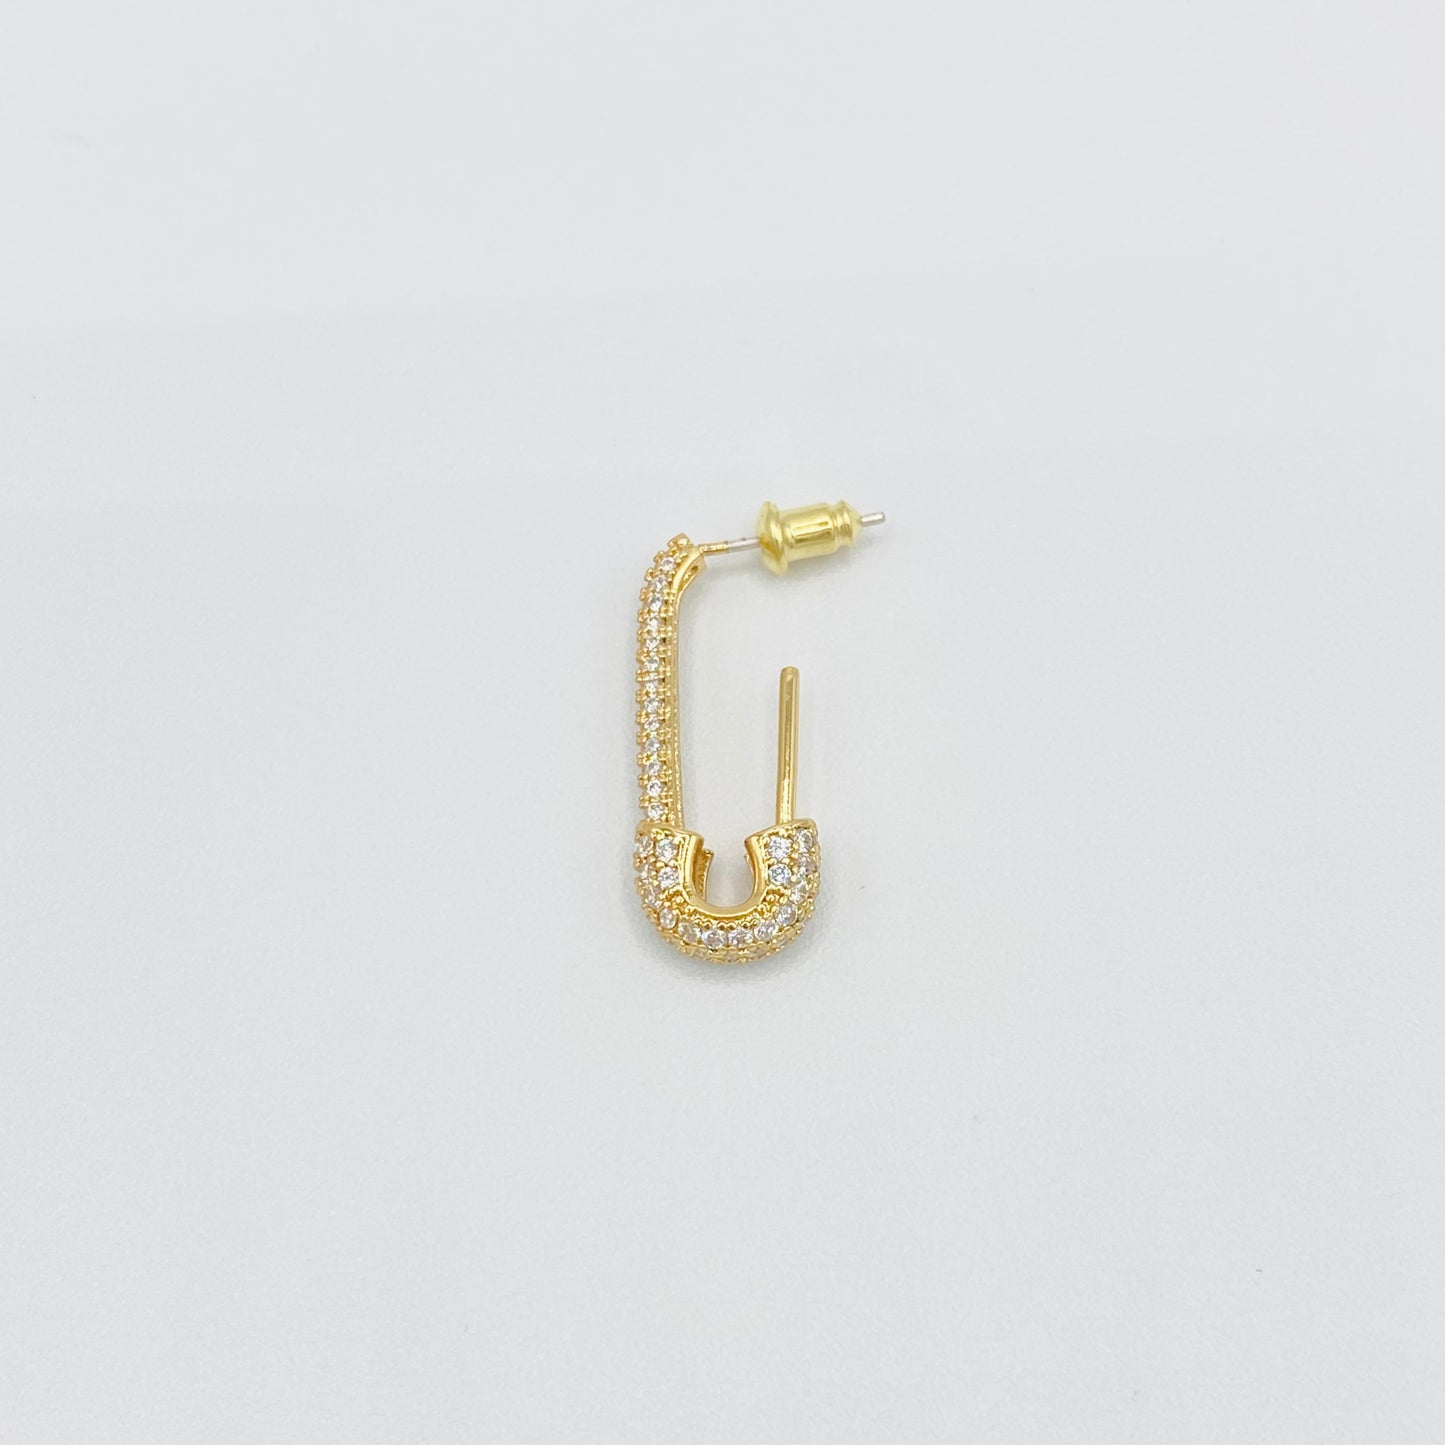 18K Gold Plated Safety Pins Stud, Kendall Jenner Sparkly Safety Pins